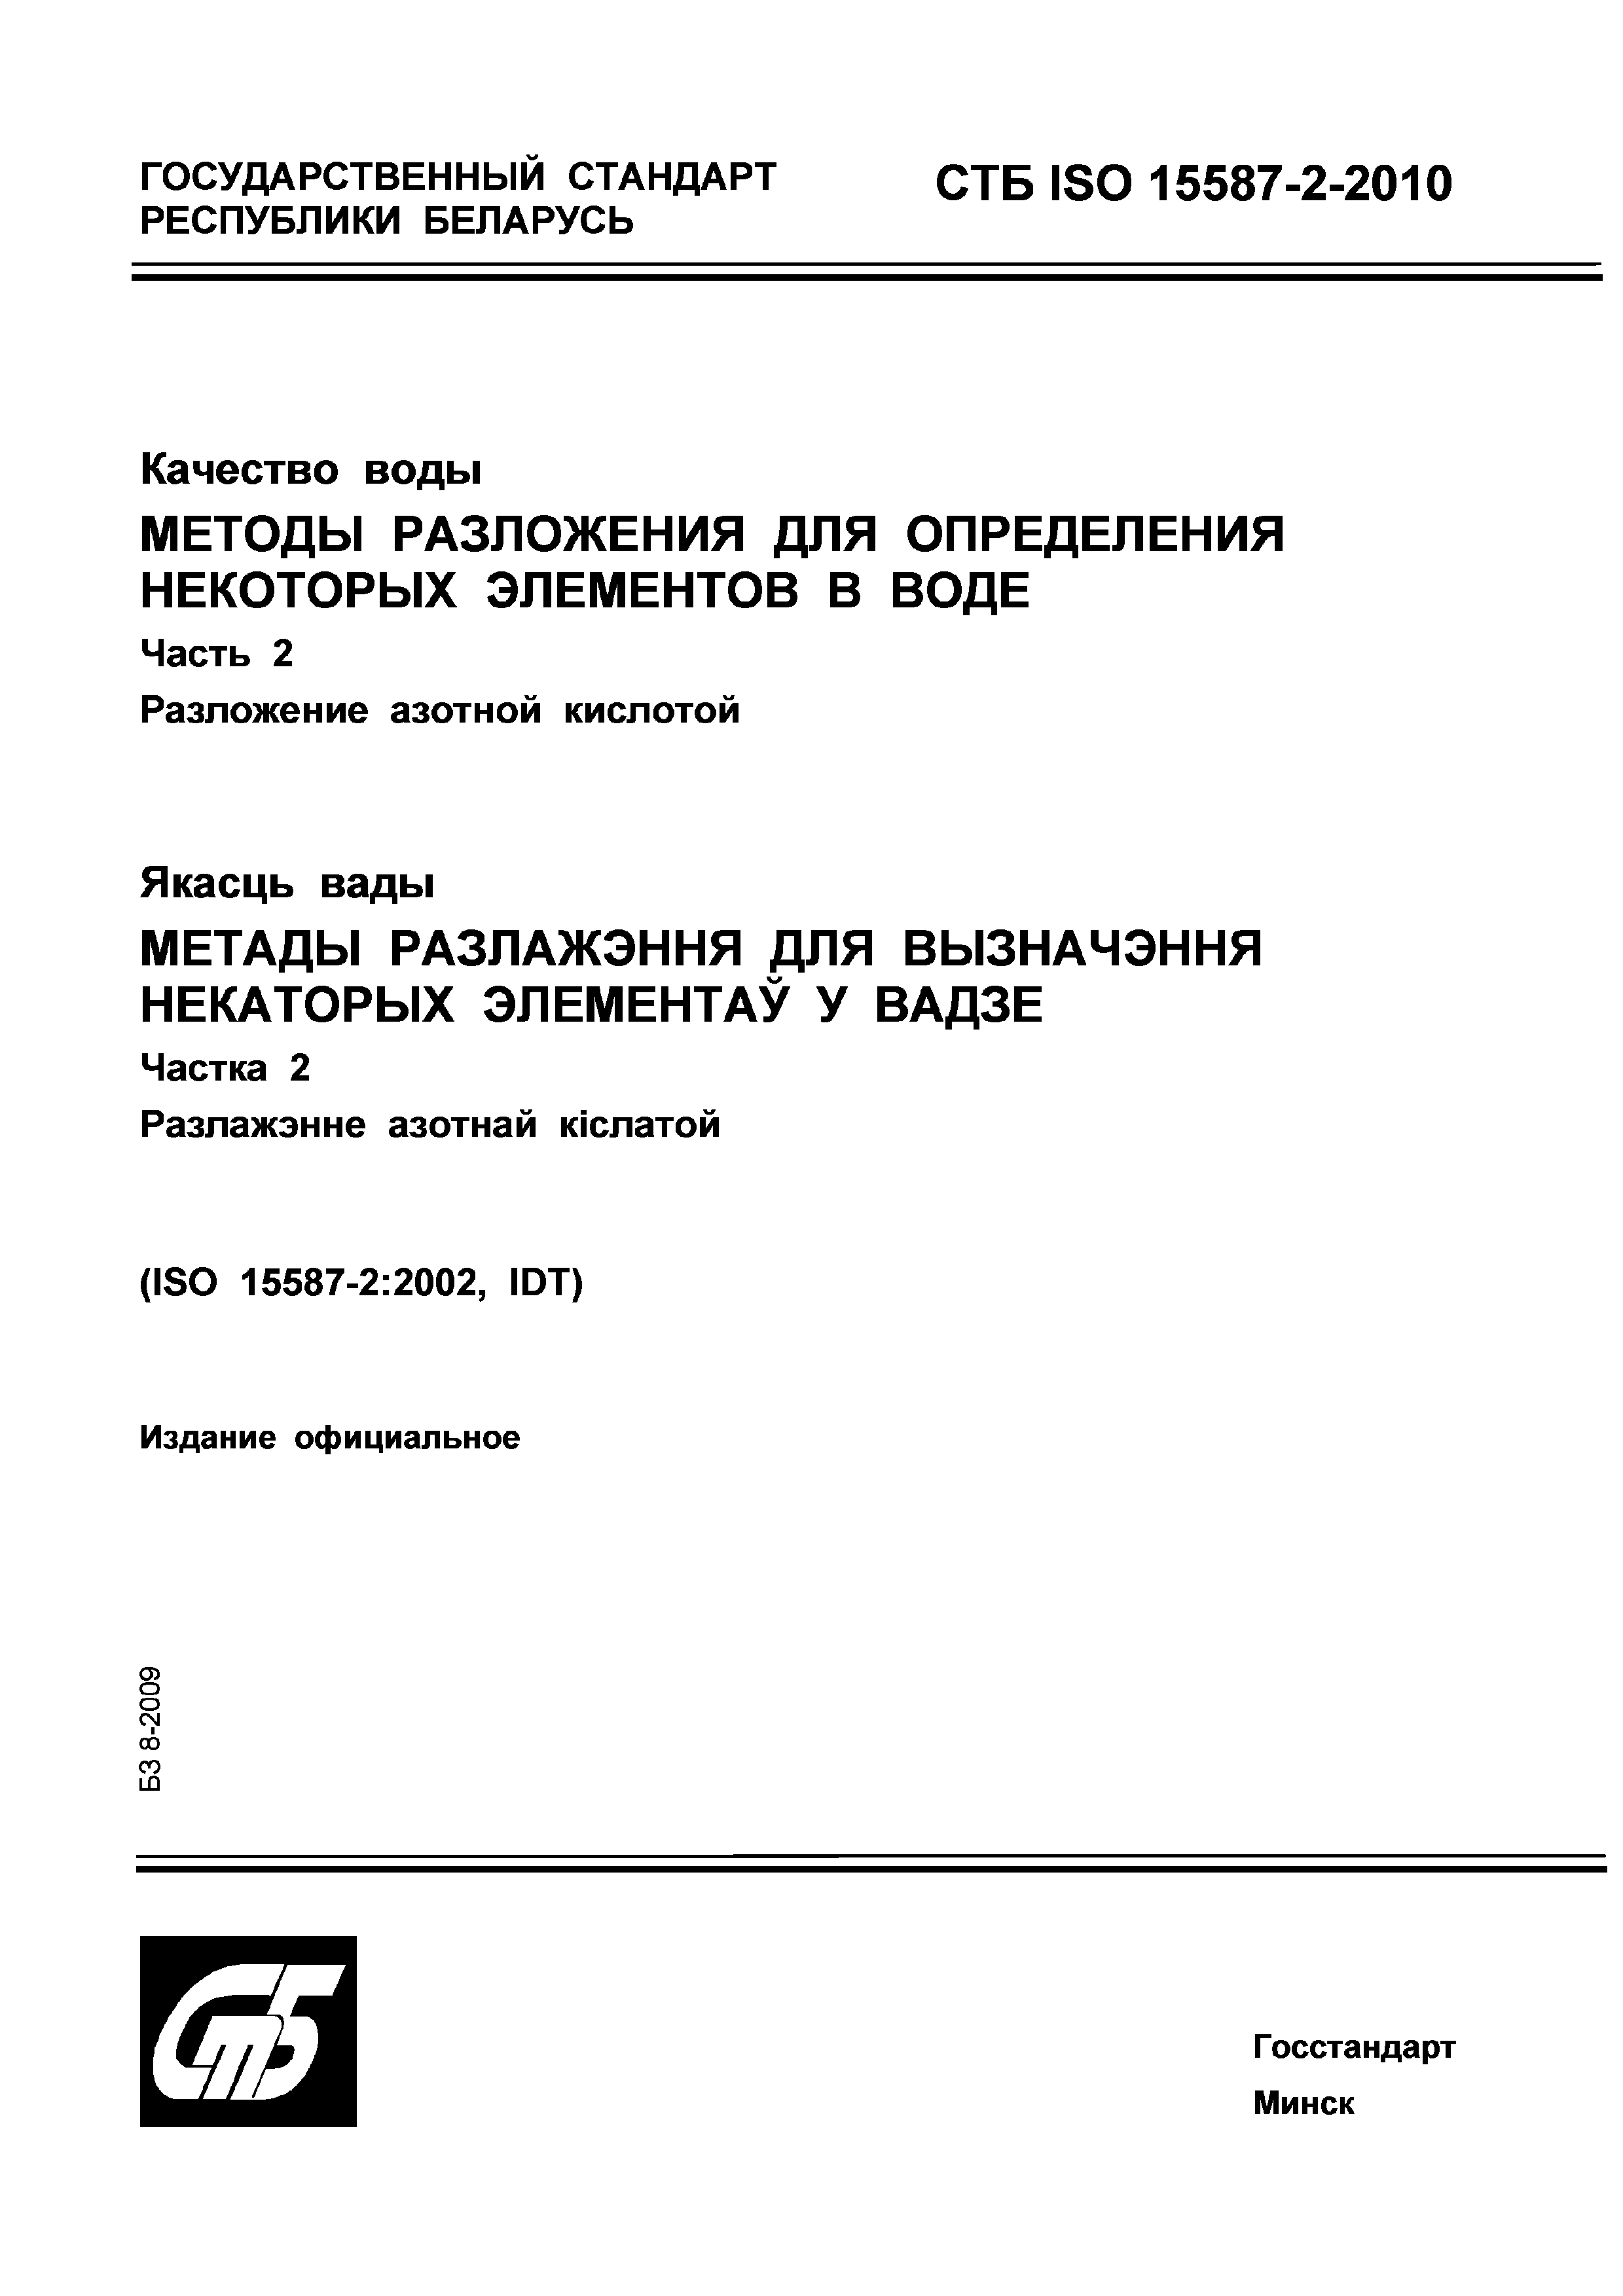 СТБ ISO 15587-2-2010